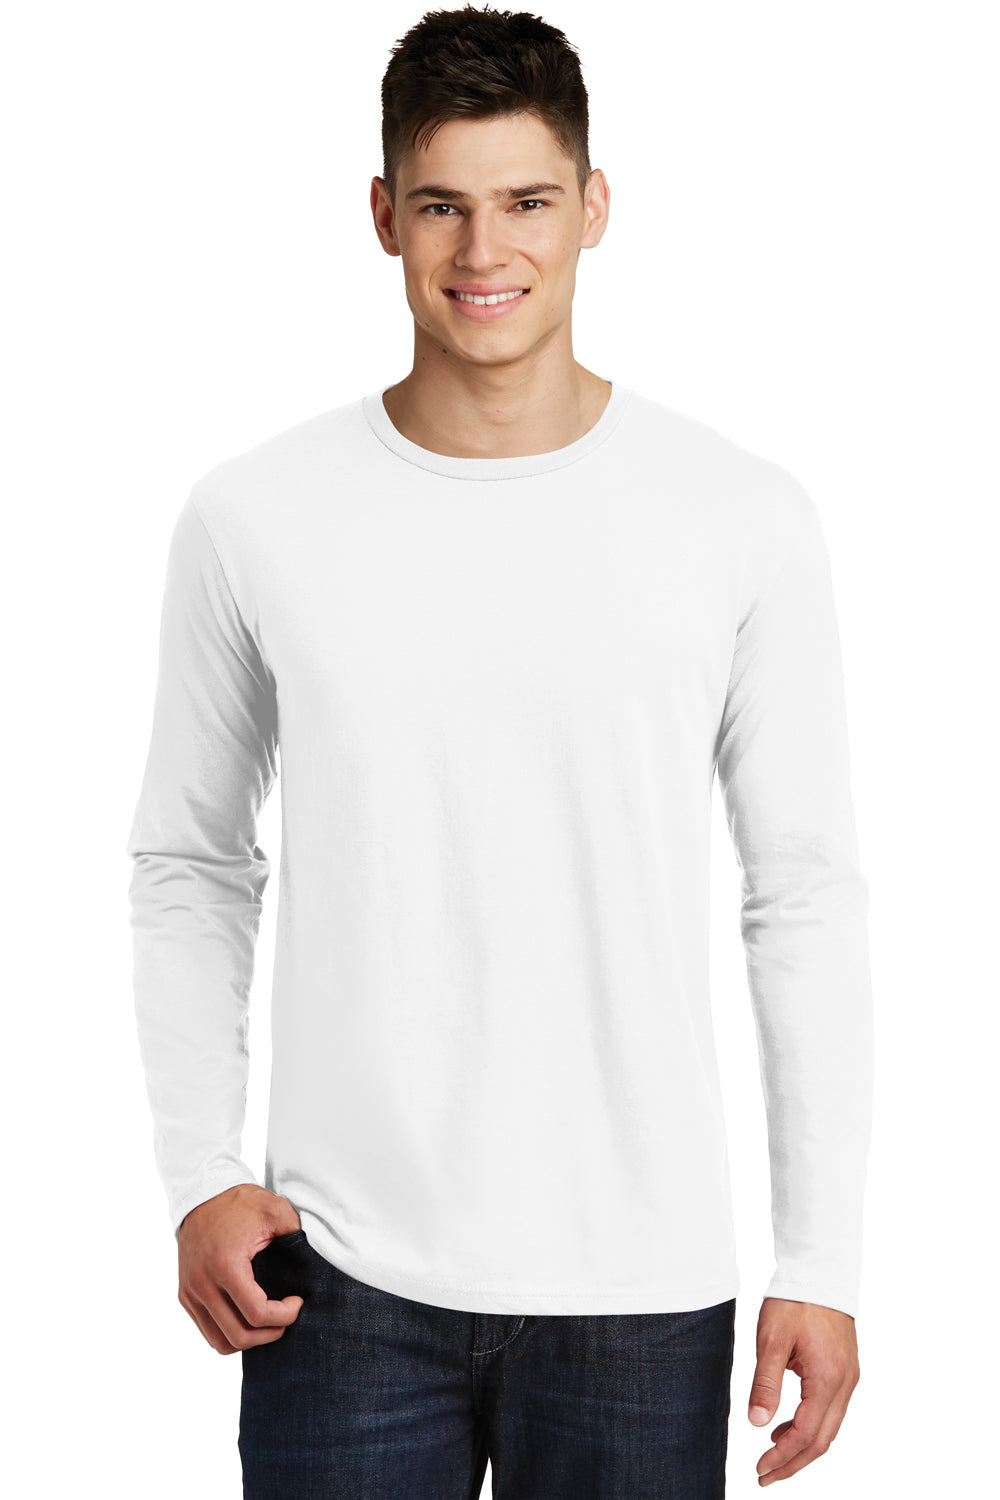 District DT6200 Mens Very Important Long Sleeve Crewneck T-Shirt White Front